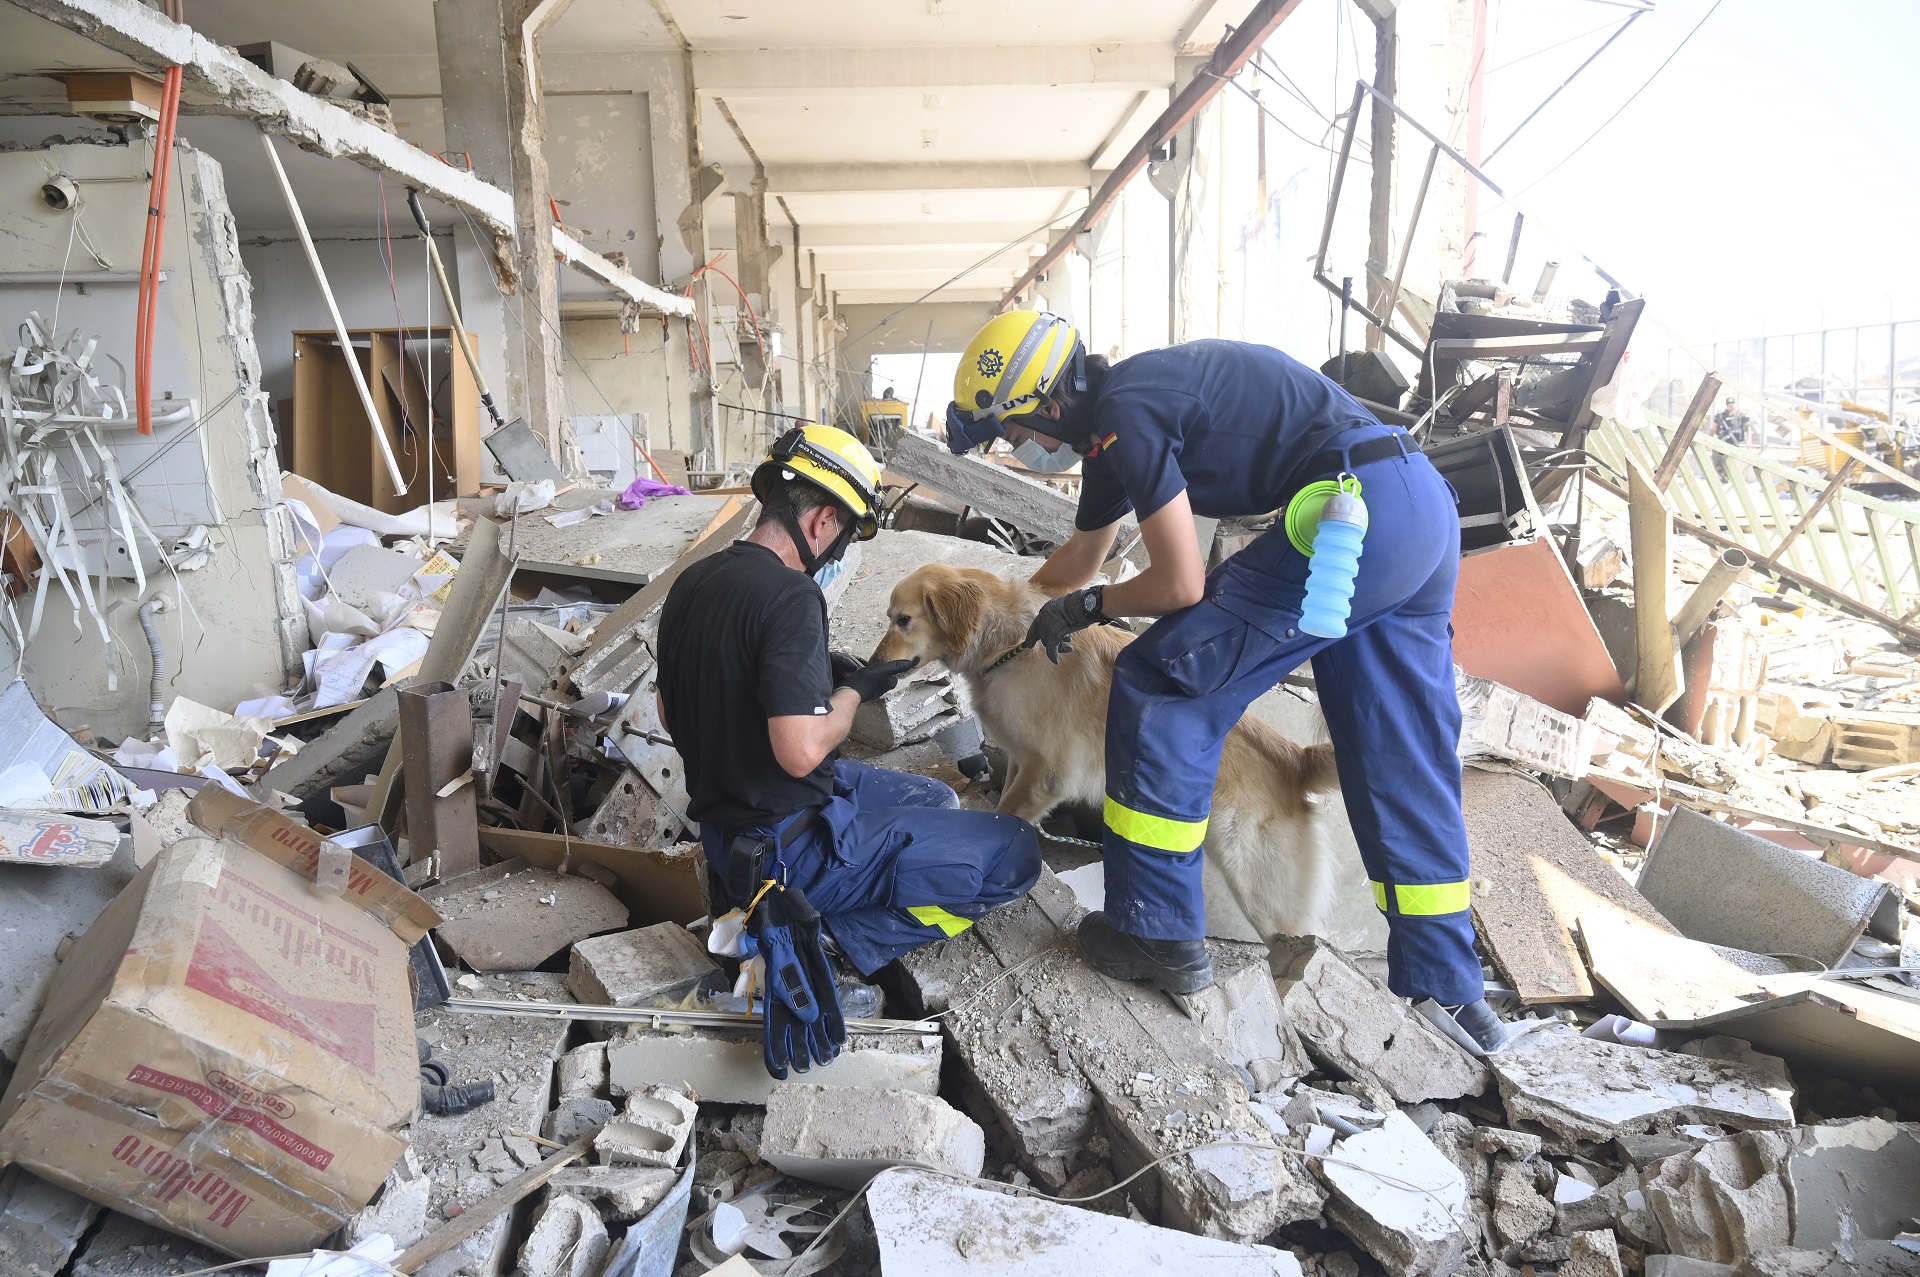 epa08589105 Members of German Federal Agency for Technical Relief (THW) use rescue dogs during the search for bodies and survivors amid the rubble three days after explosions that hit Beirut port, in Beirut, Lebanon, 07 August 2020. According to the Lebanese Health Ministry, at least 137 people were killed, and more than 5,000 injured in the blast believed to have been caused by an estimated 2,750 tons of ammonium nitrate stored in a warehouse. The explosion and its shockwave on 04 August 2020 devastated the port area.  EPA/WAEL HAMZEH